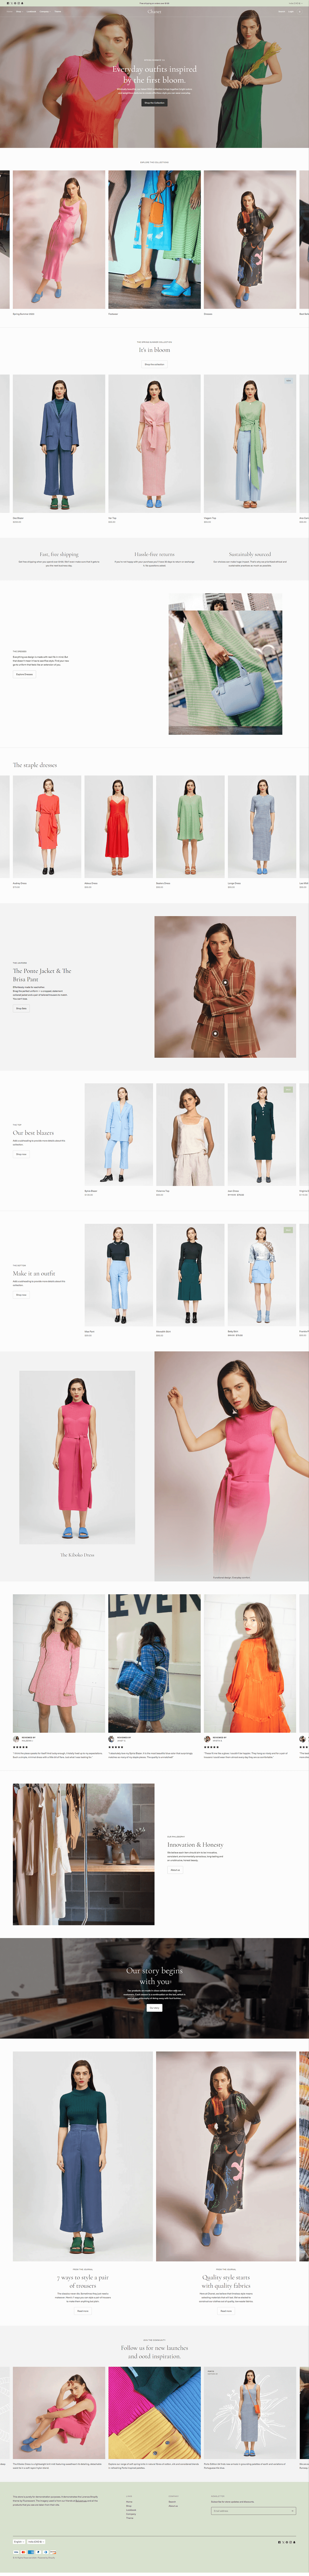 I designed this Shopify e-commerce store/website for a clothing brand.